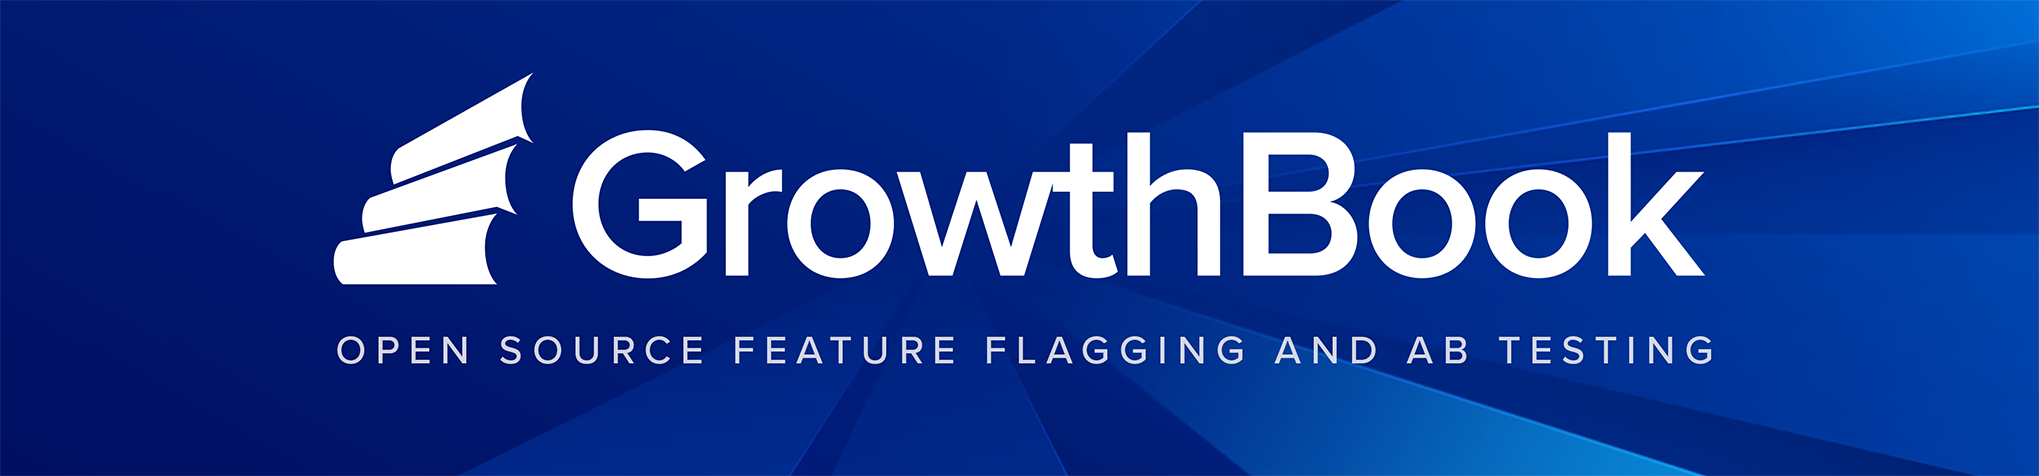 GrowthBook: Open source feature flagging and A/B testing platform